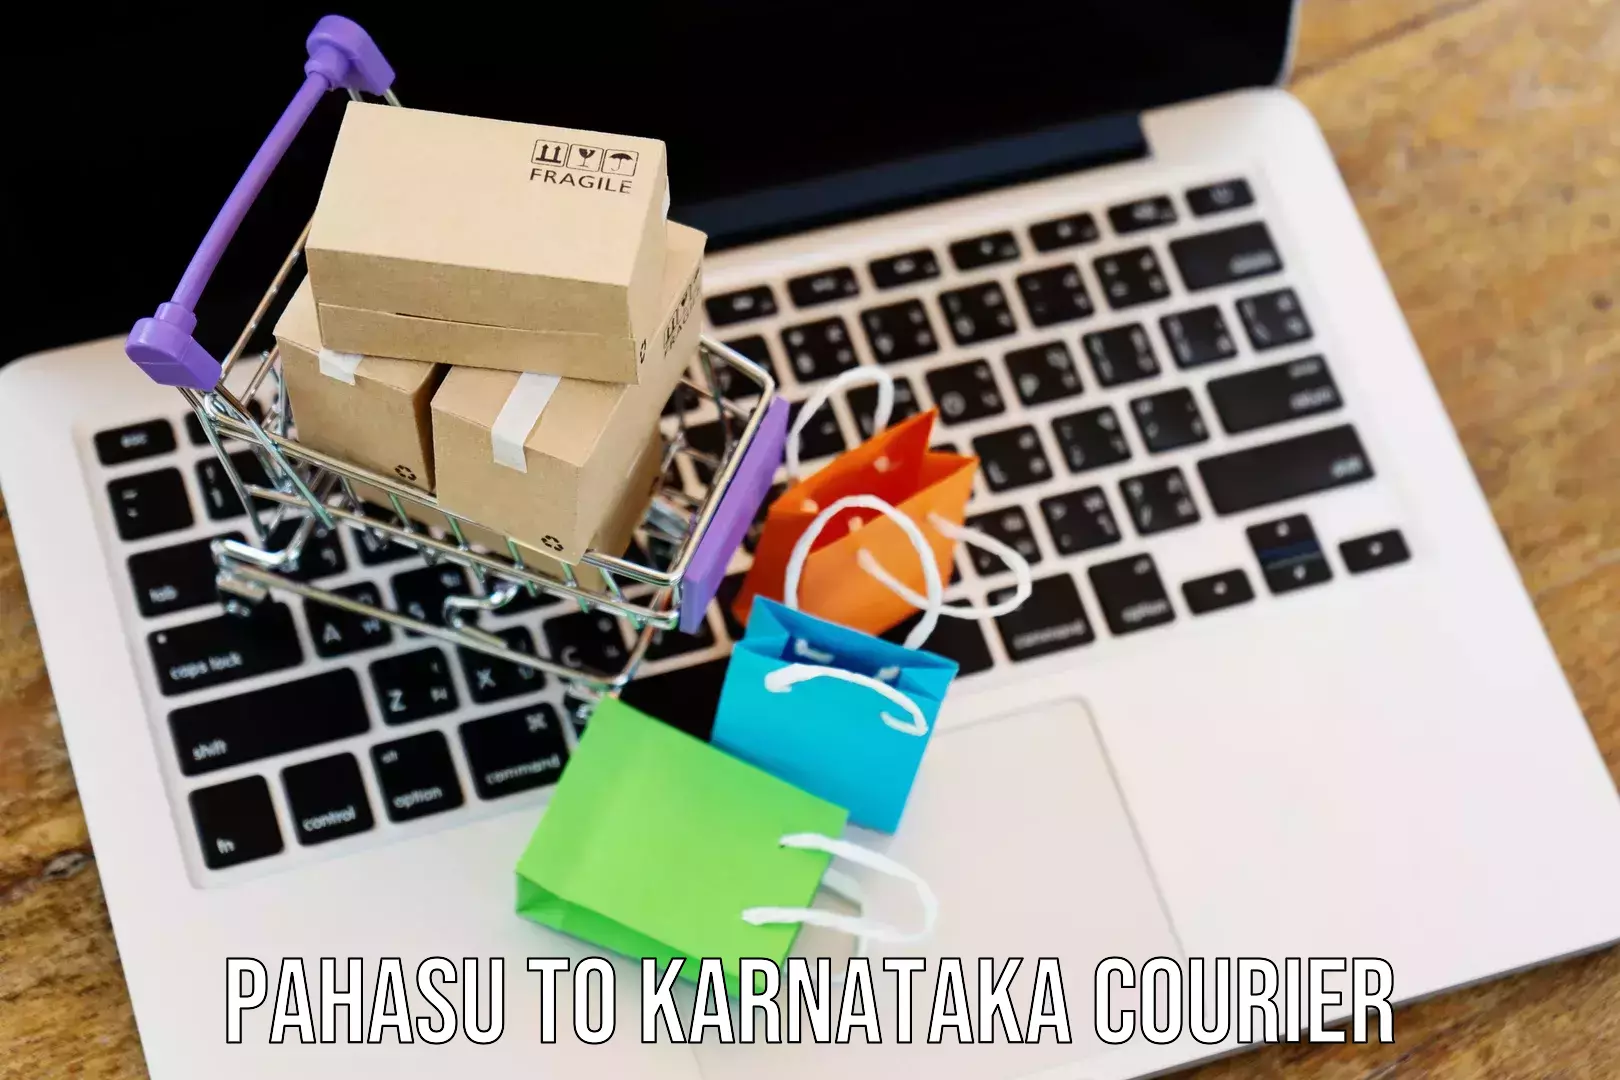 End-to-end delivery in Pahasu to Karnataka